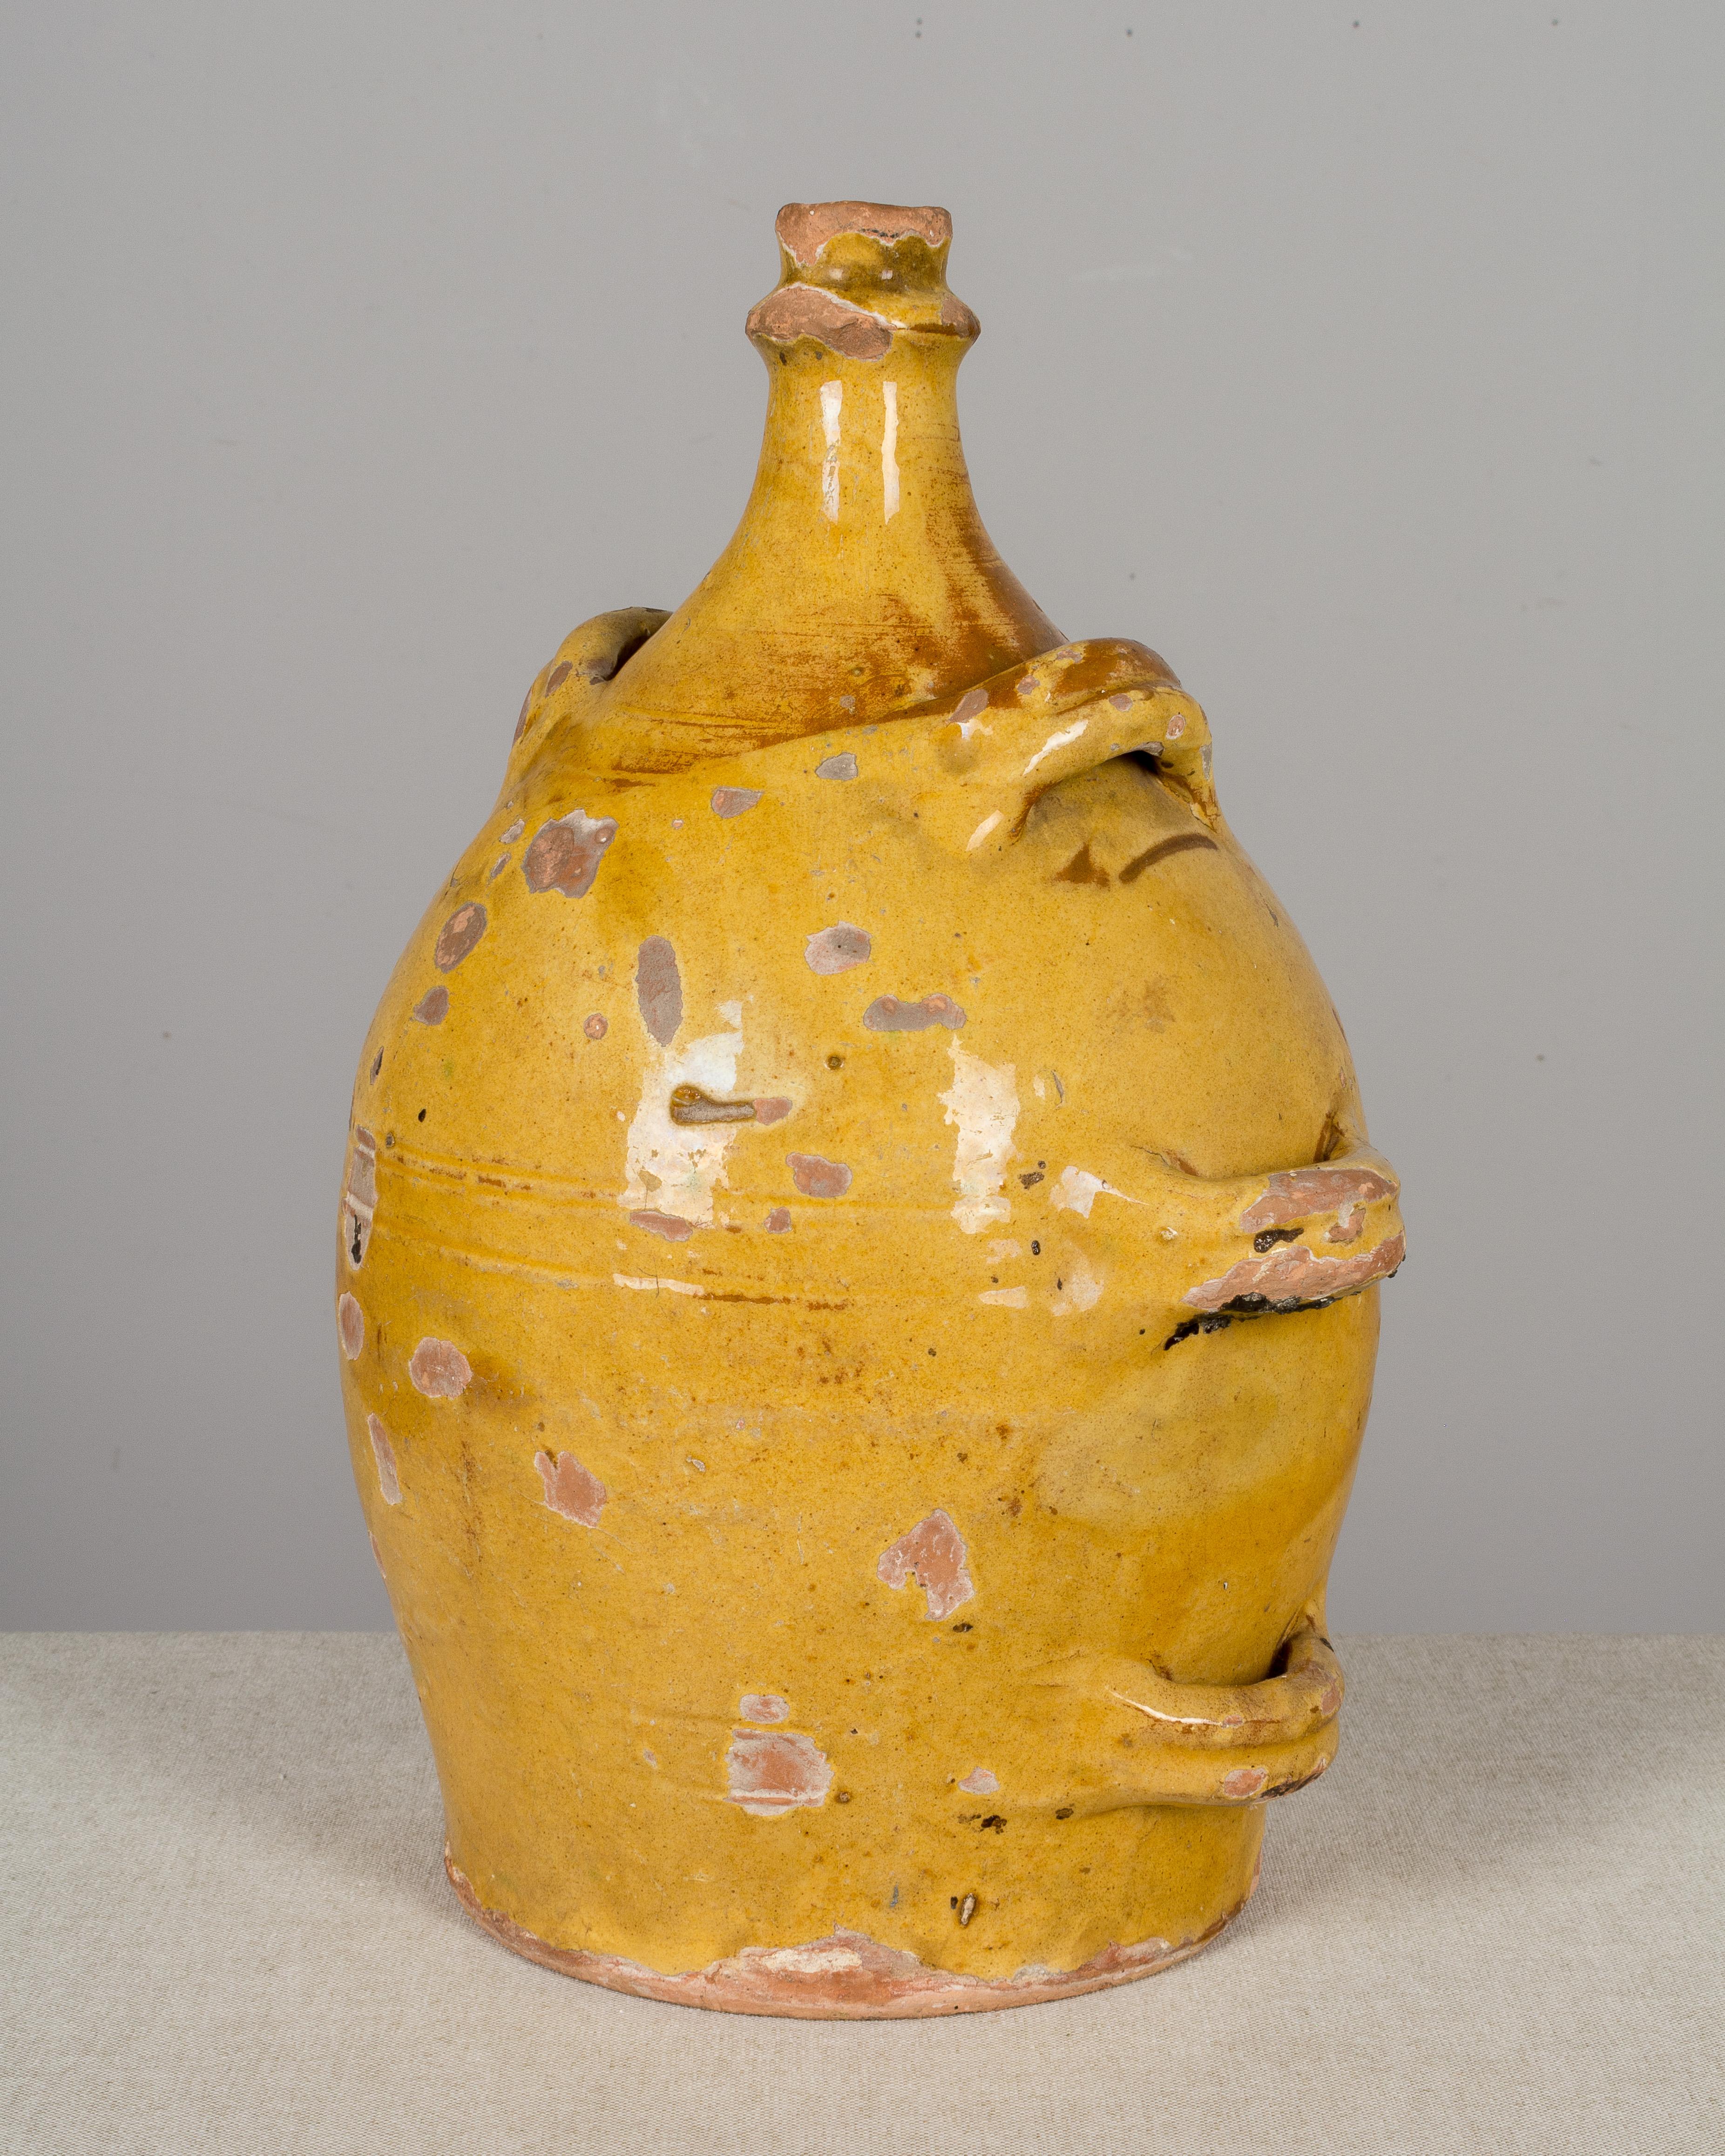 A 19th century earthenware pottery jug from the Southwest of France with traditional ochre yellow glaze. This unusual terracotta pot has six handles up the sides and was used to store vinegar. Beautiful patina and warm yellow color. Minor losses to